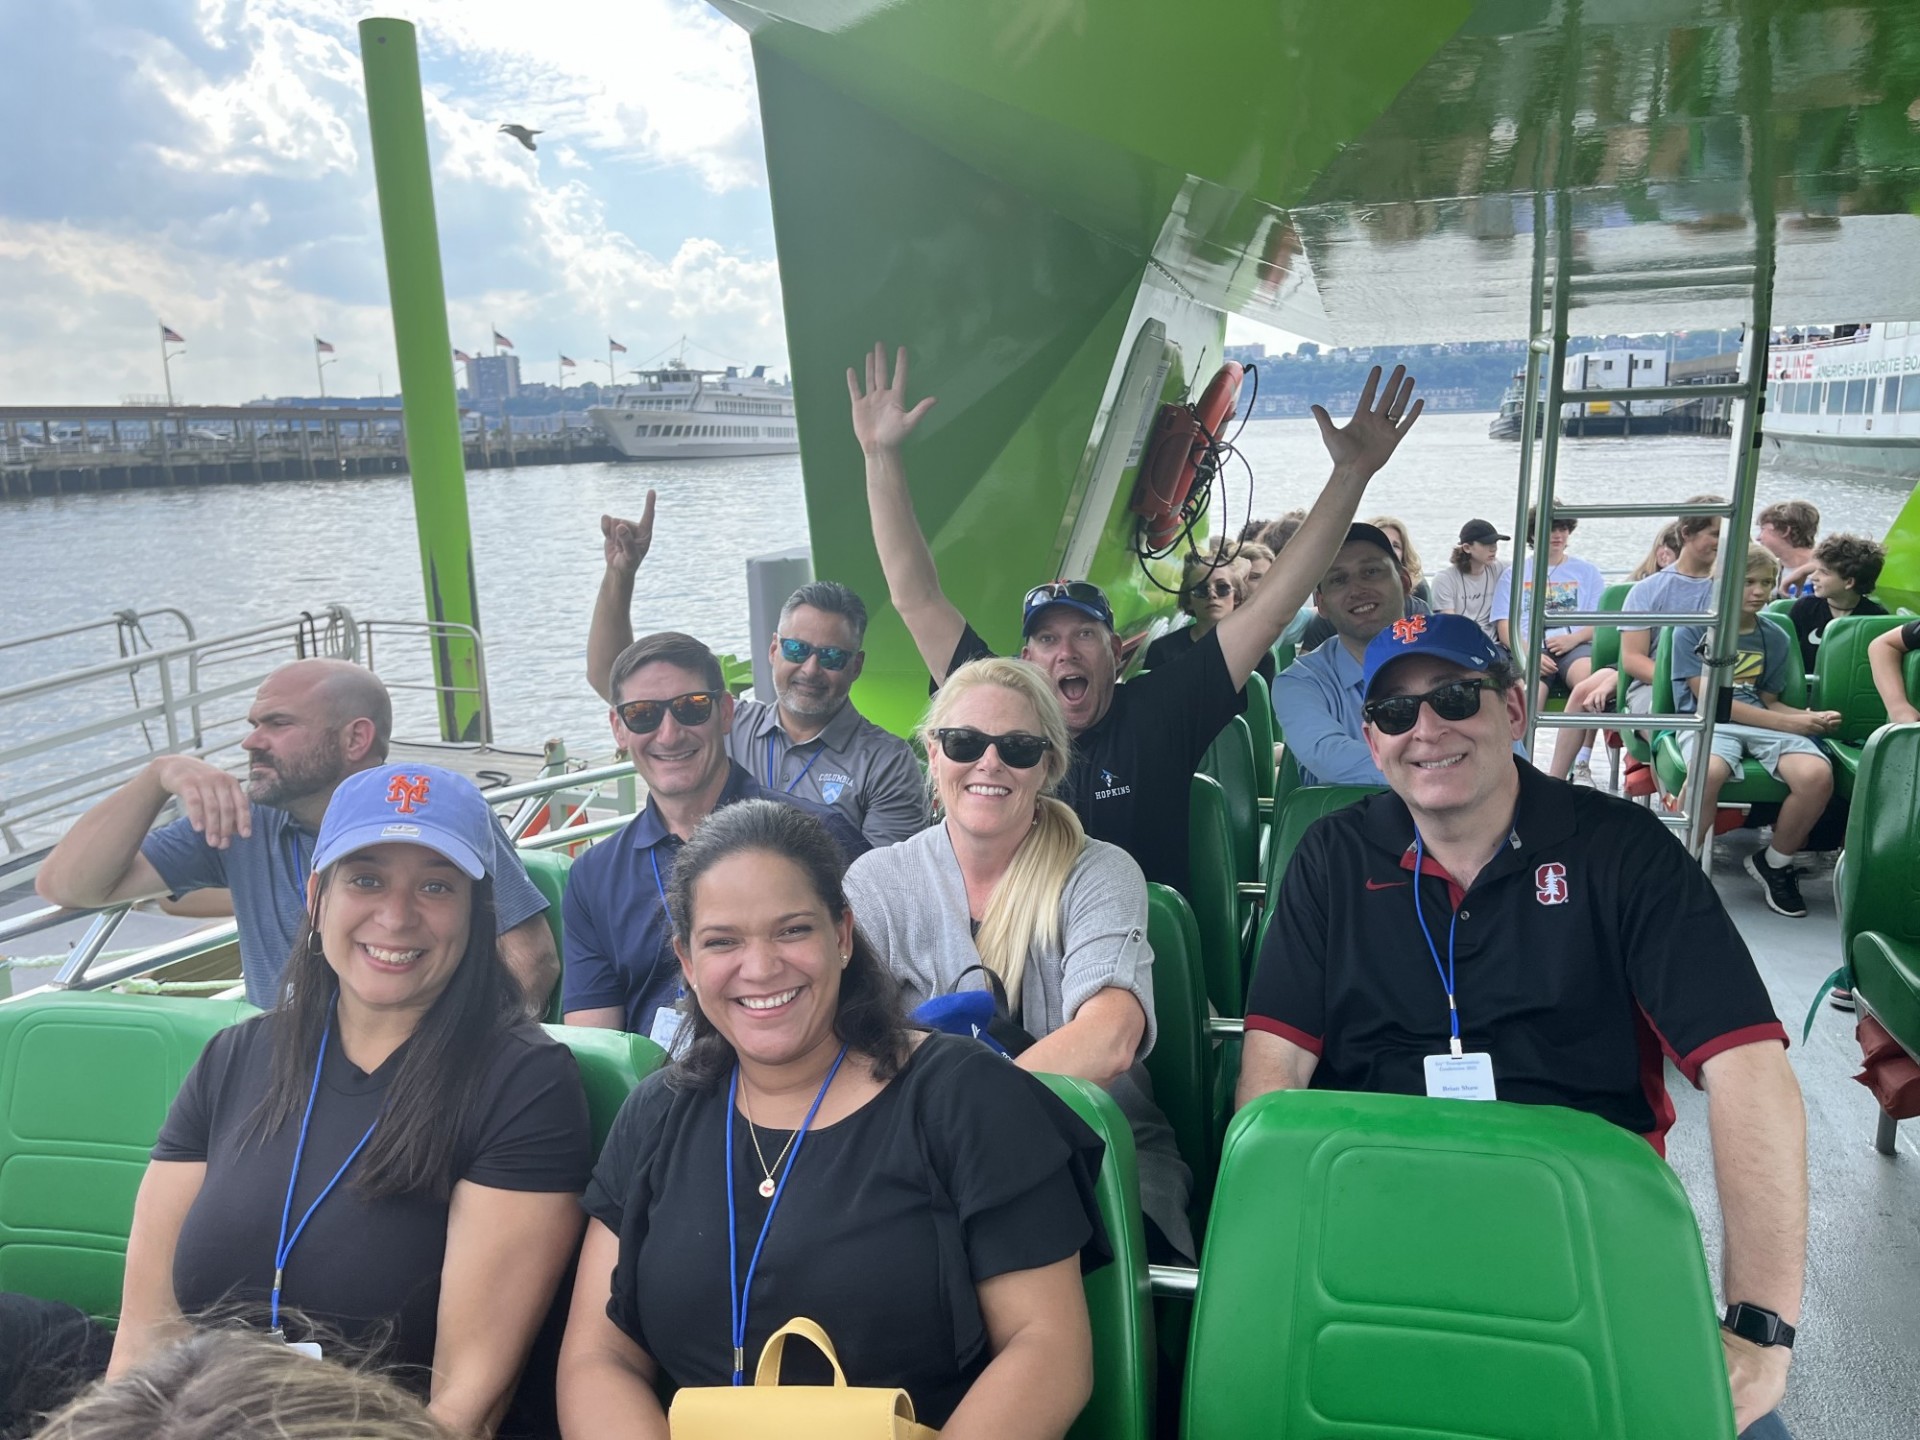 The group rides the Beast Boat, a green speedboat that operates in the Hudson River